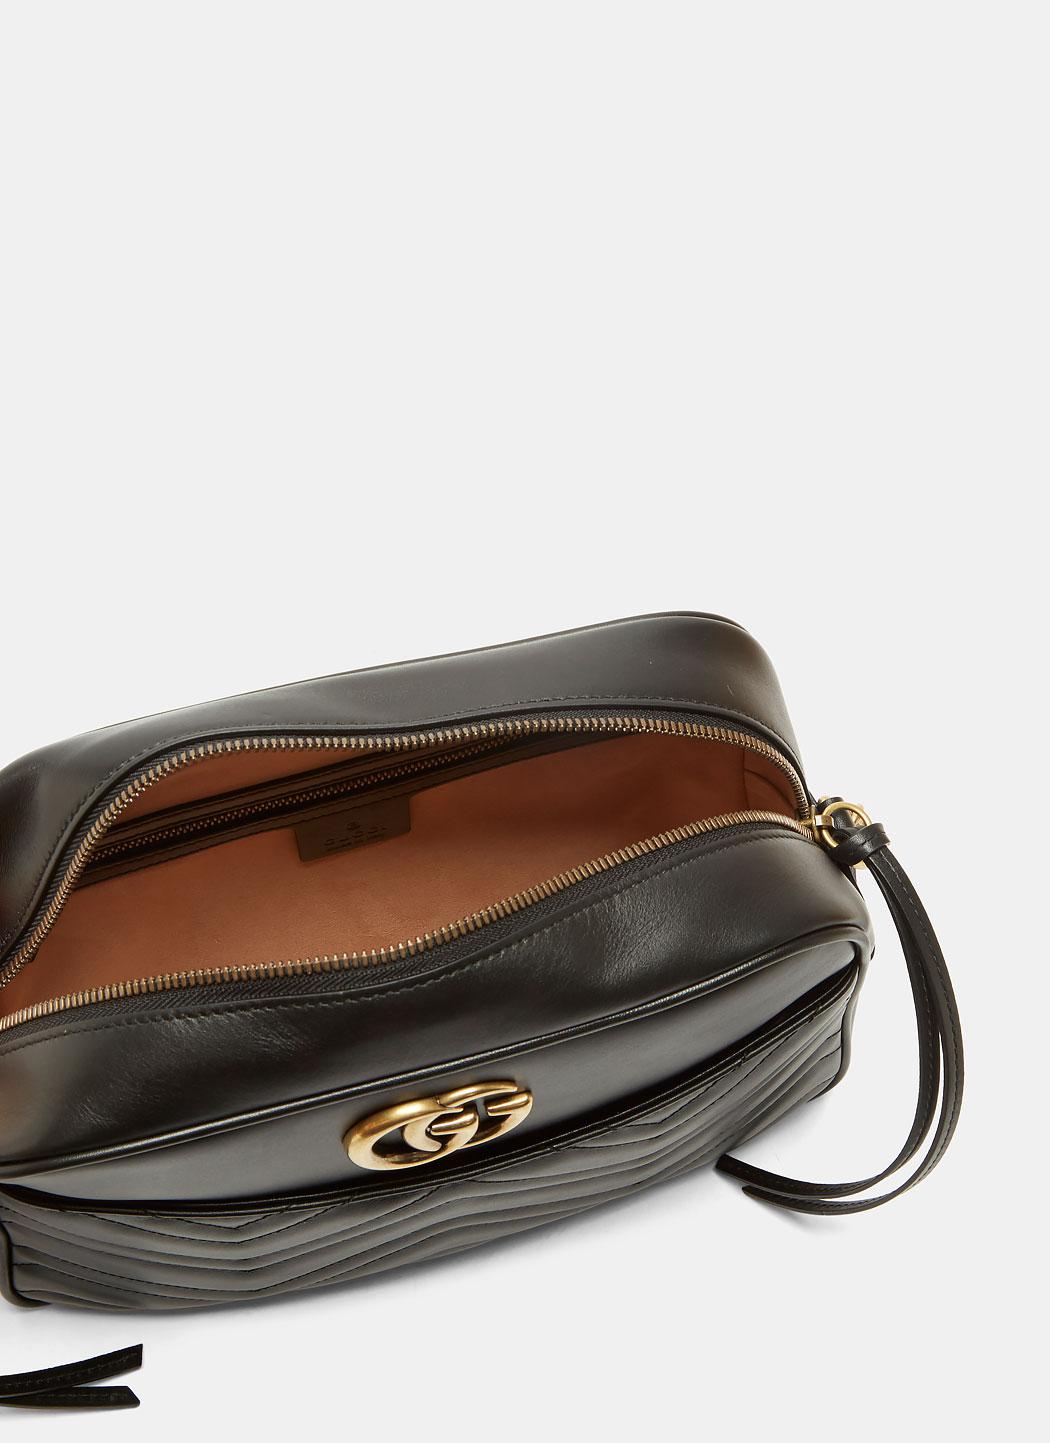 Gucci Leather Gg Marmont Matelassé Small Shoulder Bag In Black - Lyst